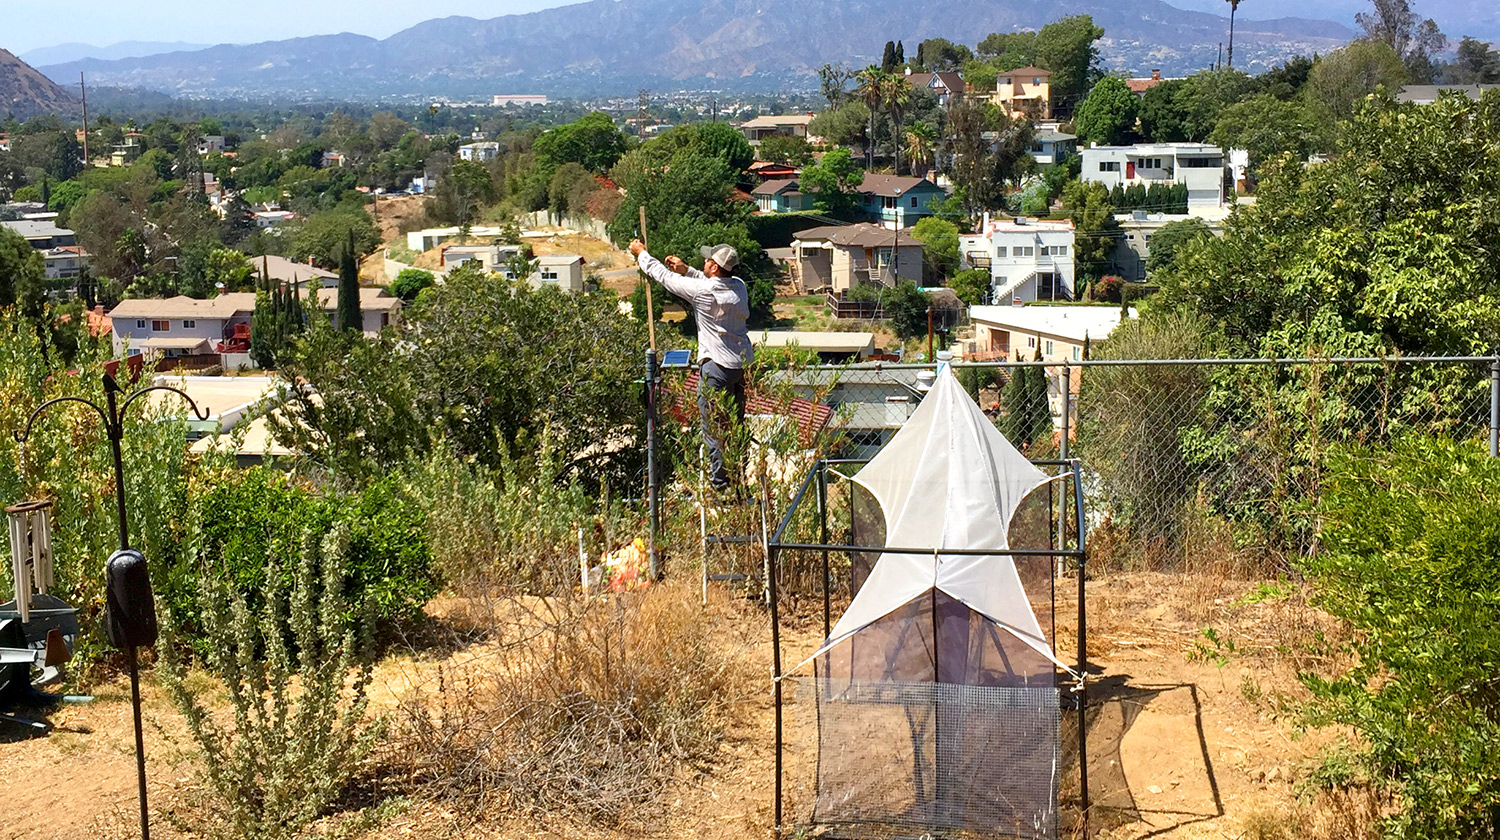 A researcher gathers data from a solar weather station at one of the community test sites. An insect trap can be seen in the foreground.